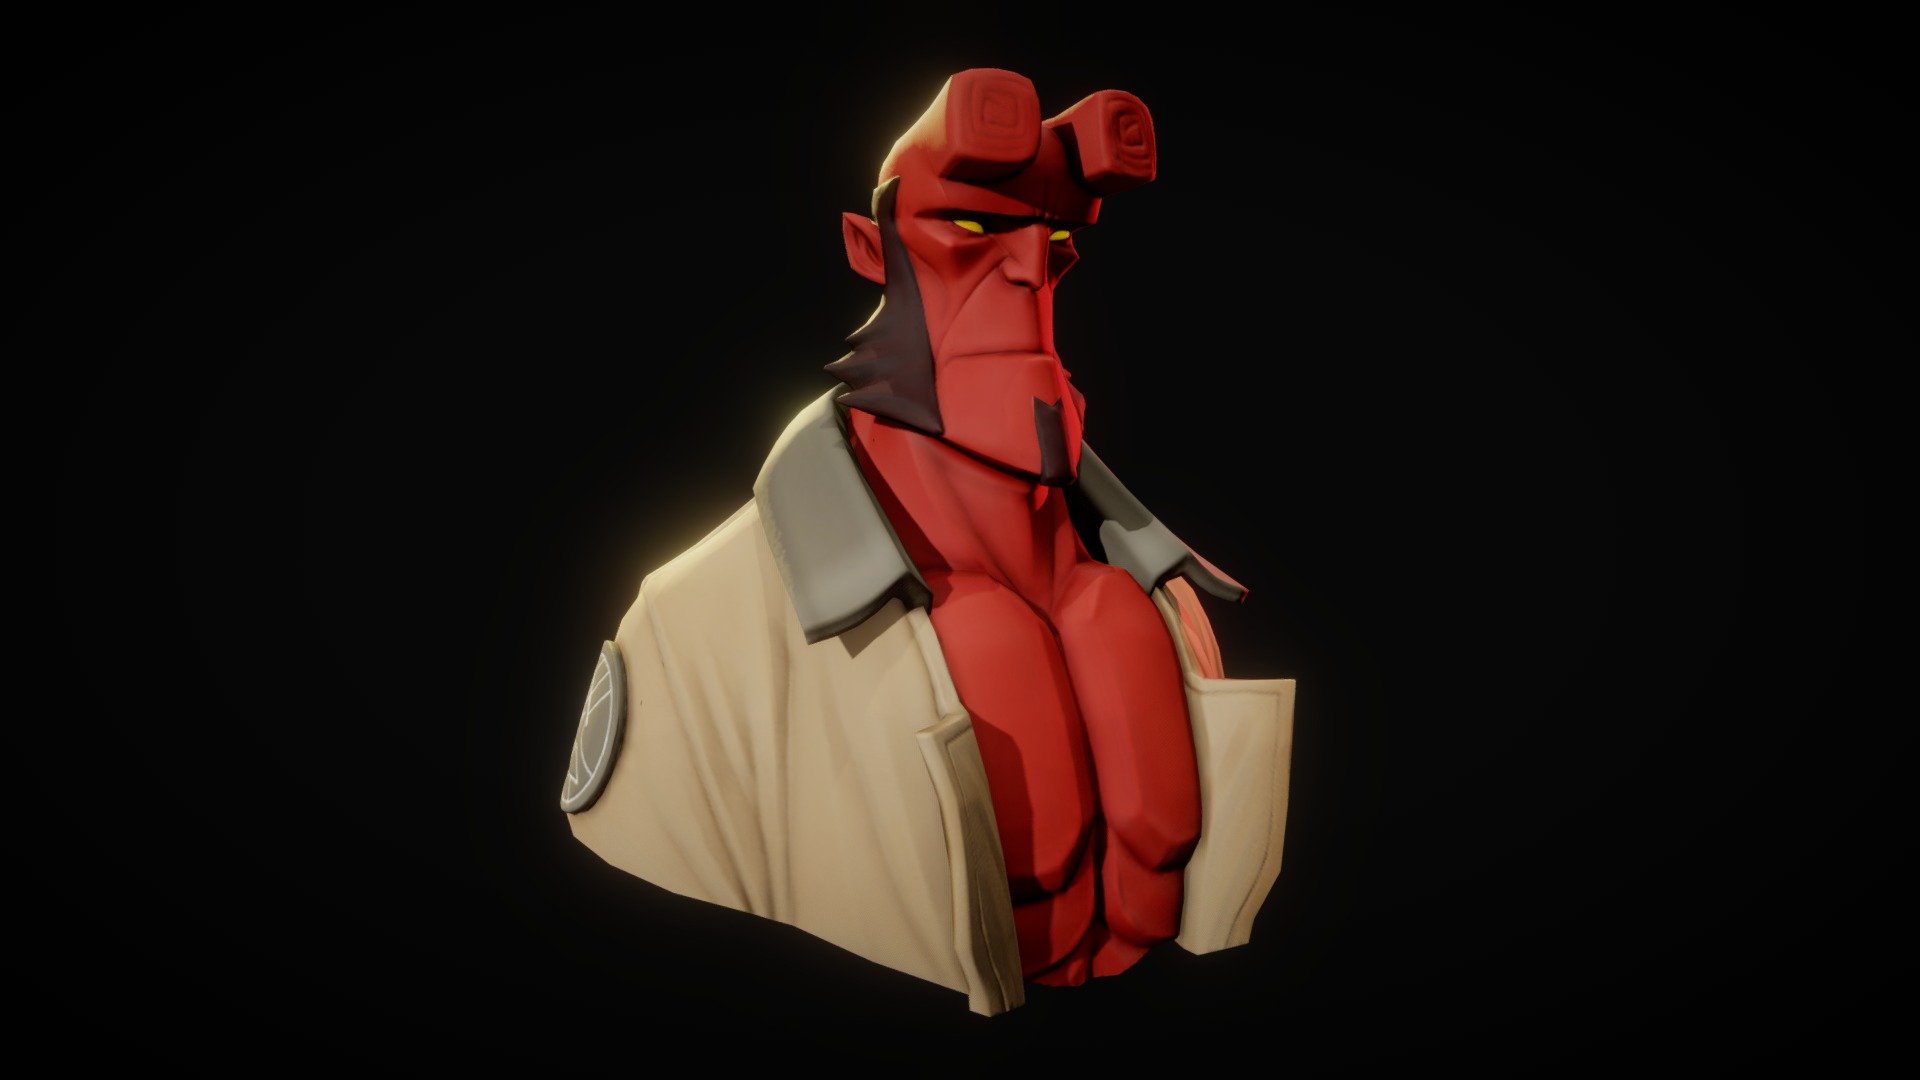 Heres a stylized Hellboy made for StylizedBustChallenge. made in blender 3d model